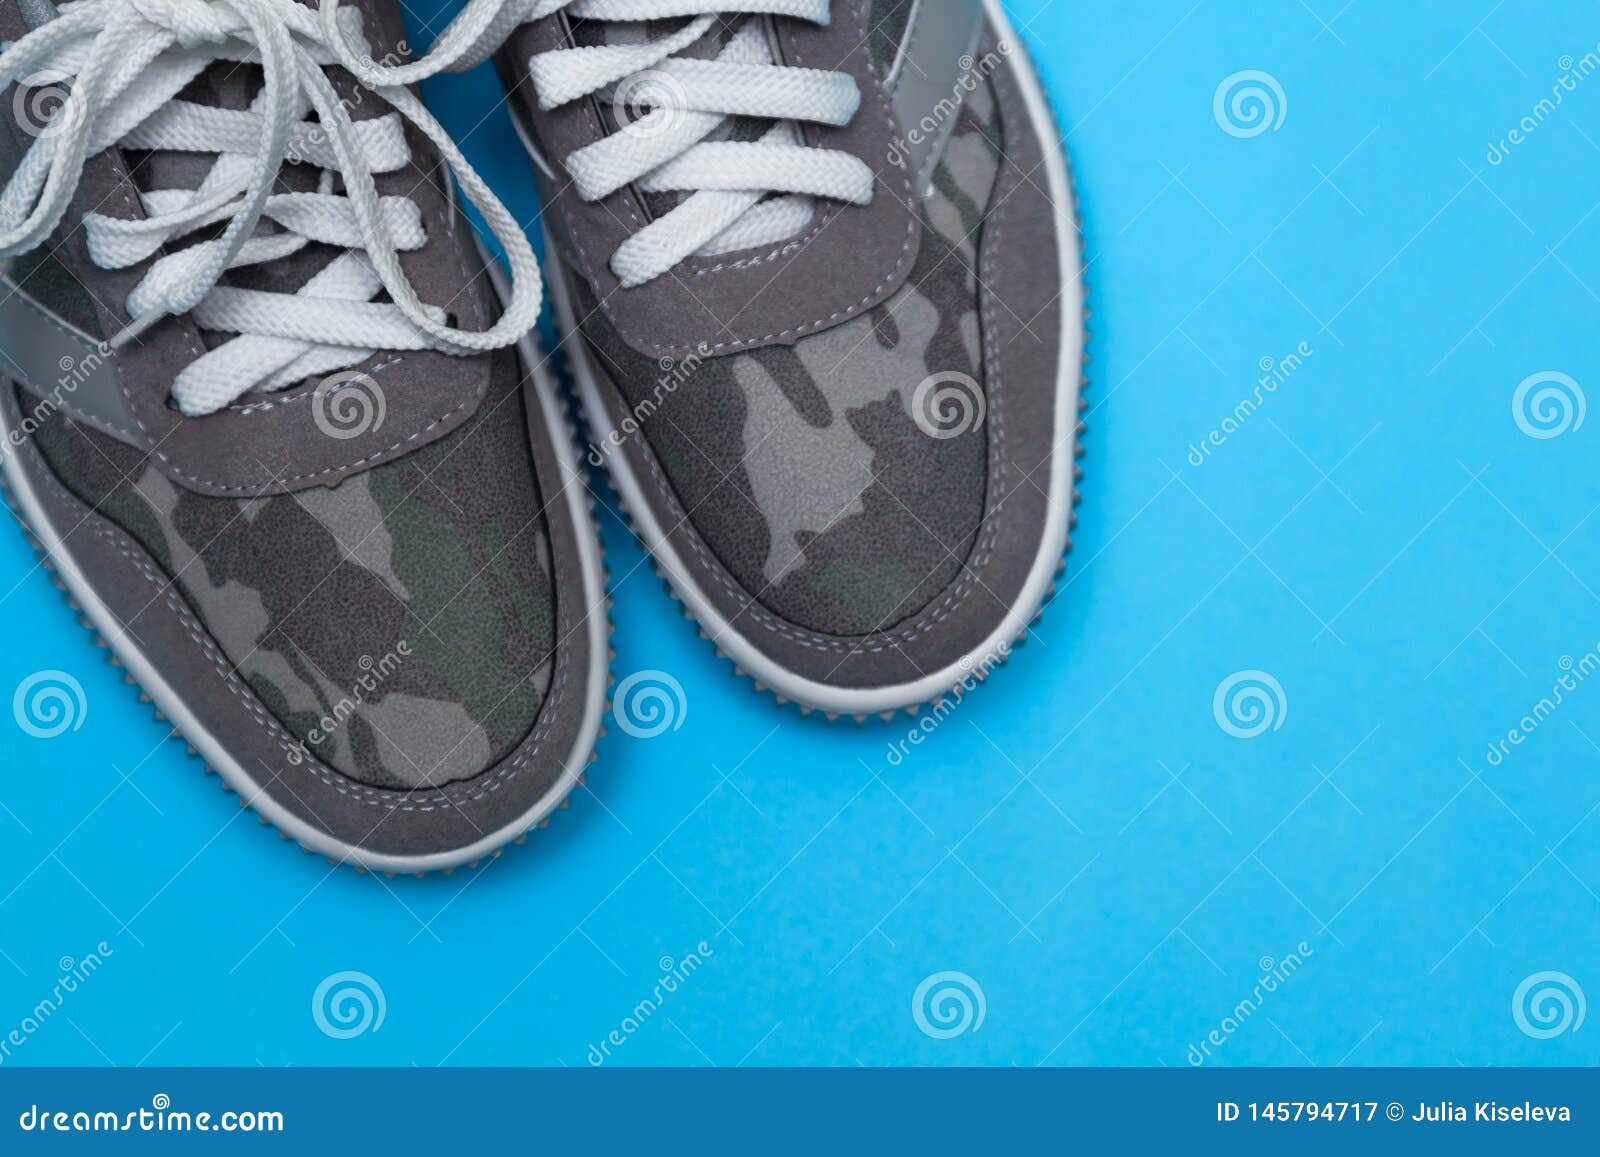 Gray Sneakers on a Blue Background Stock Image - Image of health ...